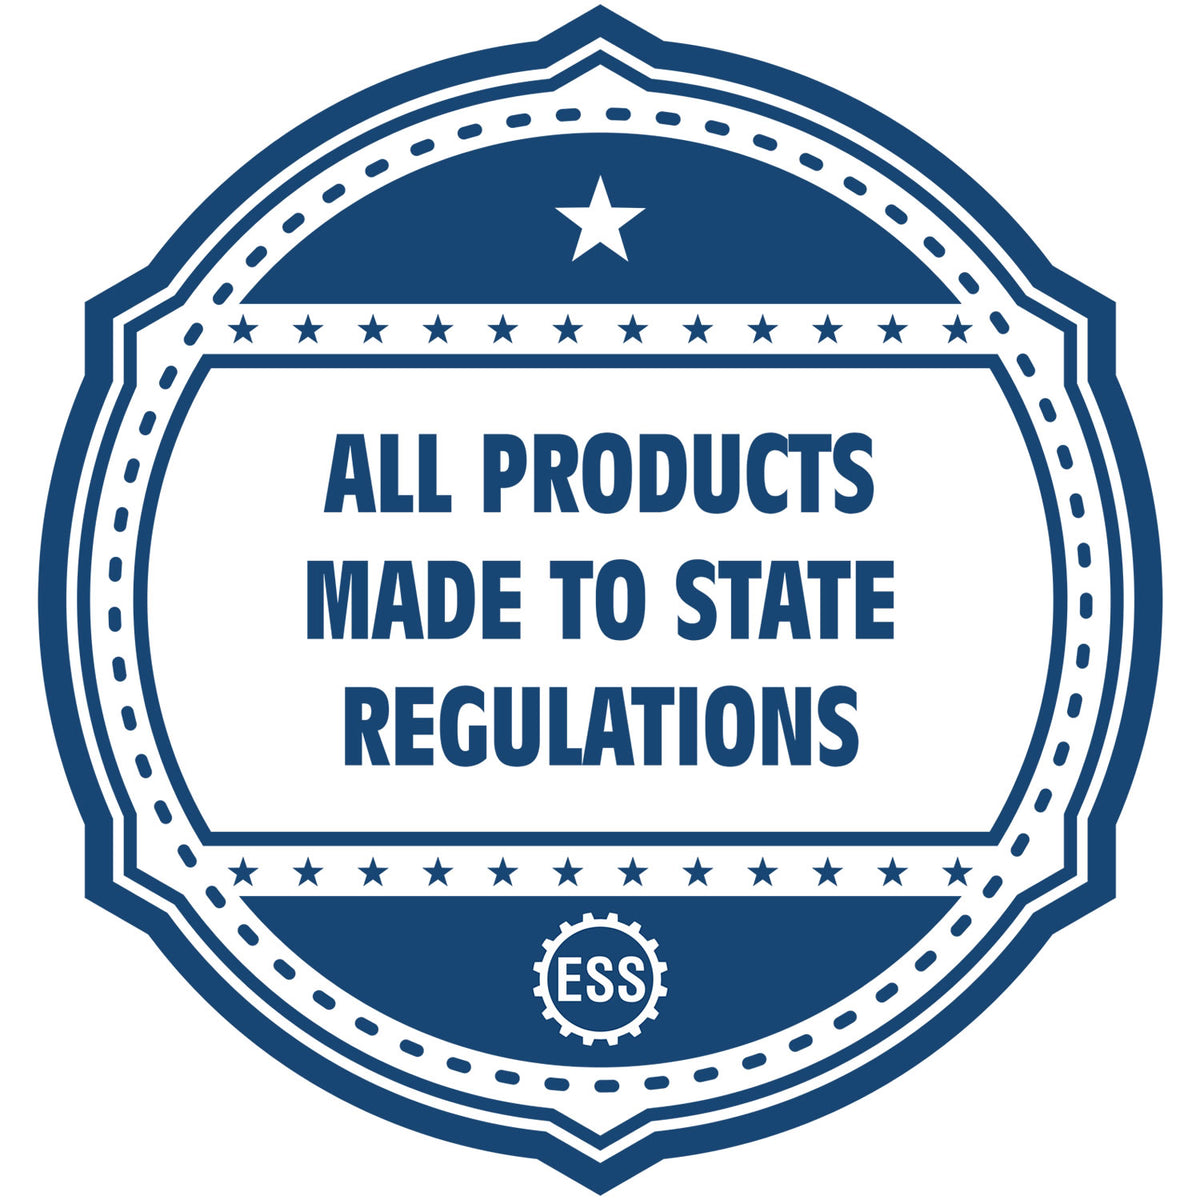 An icon or badge element for the Slim Pre-Inked New Hampshire Land Surveyor Seal Stamp showing that this product is made in compliance with state regulations.